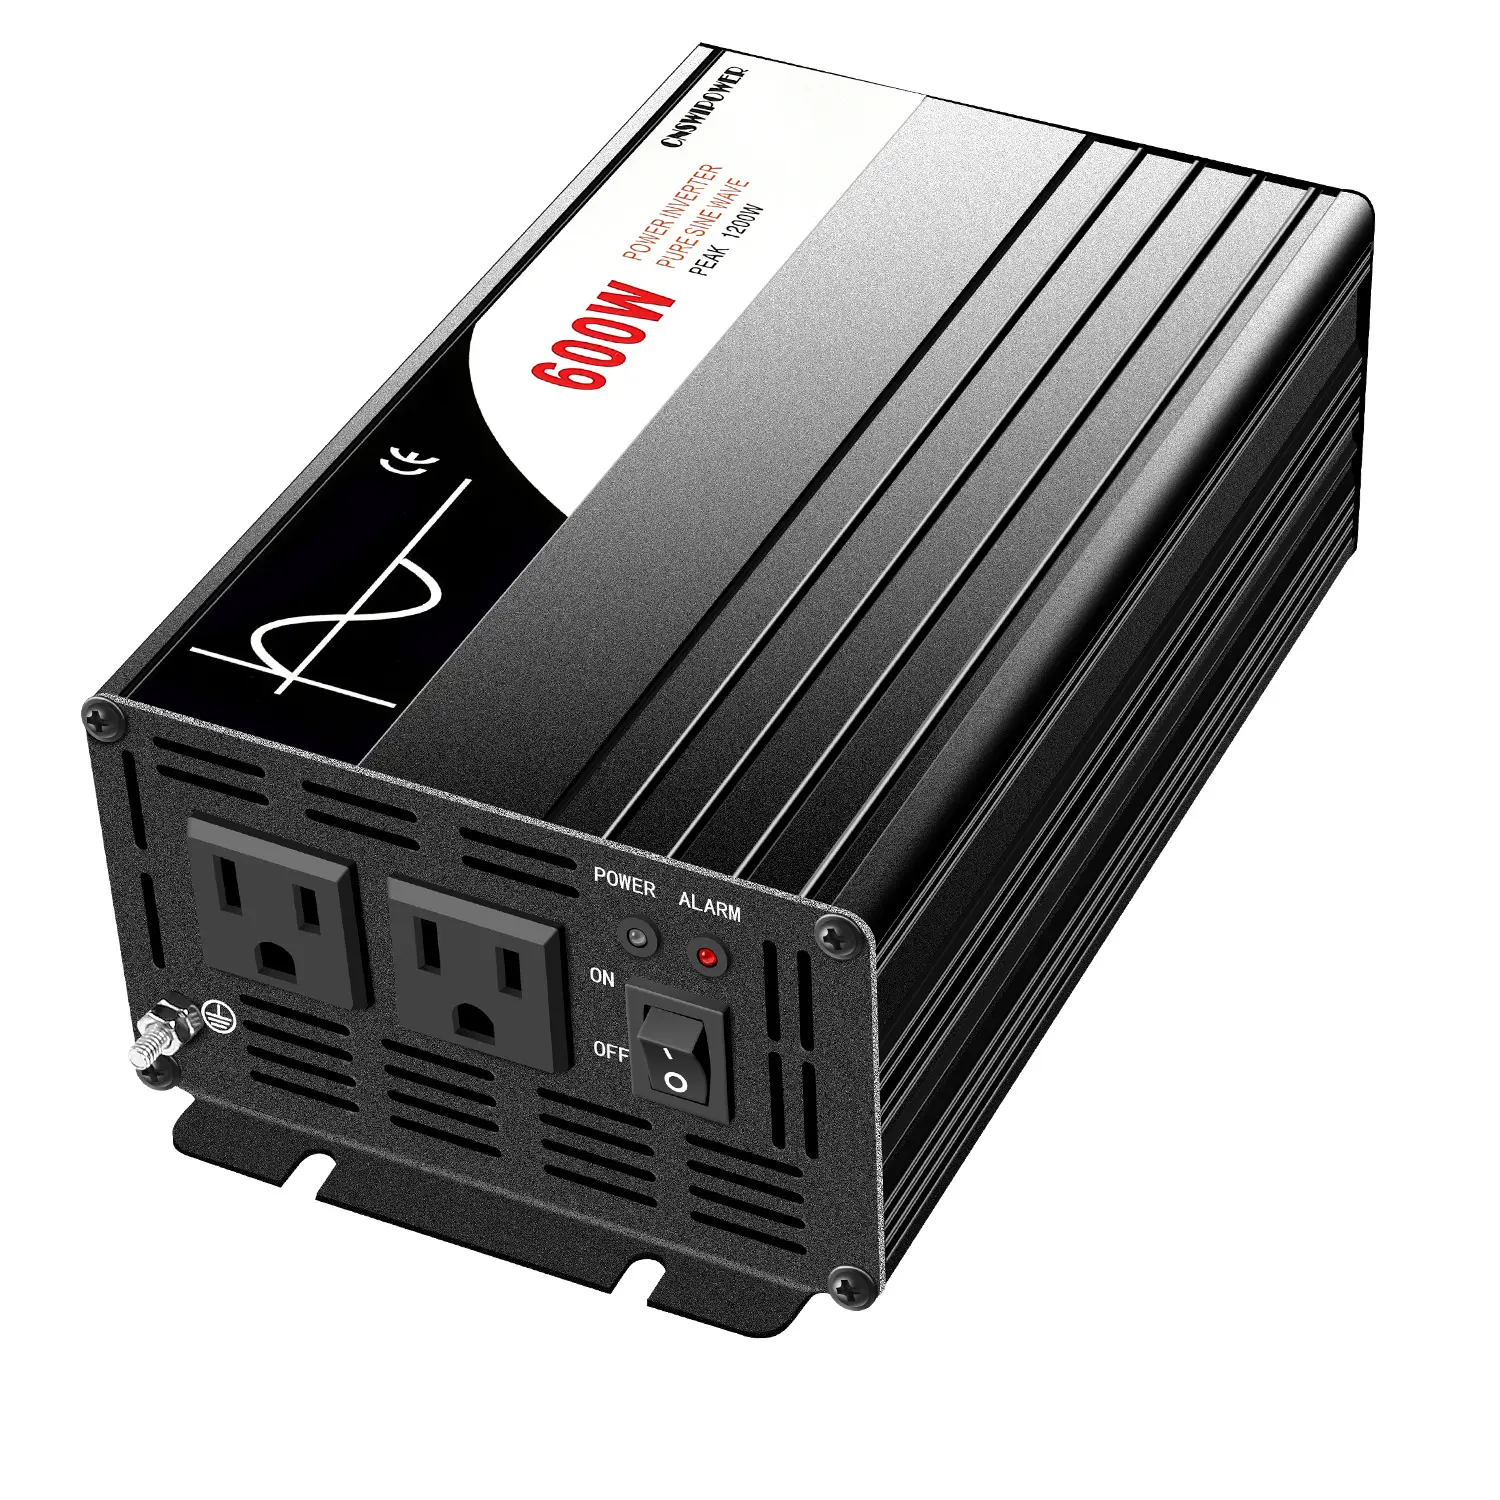 CNSWIPOWER 600W/1200W Peak Pure Sine Wave Power Inverter 24 Volt DC to AC 120V Suitable for 24V vehicles